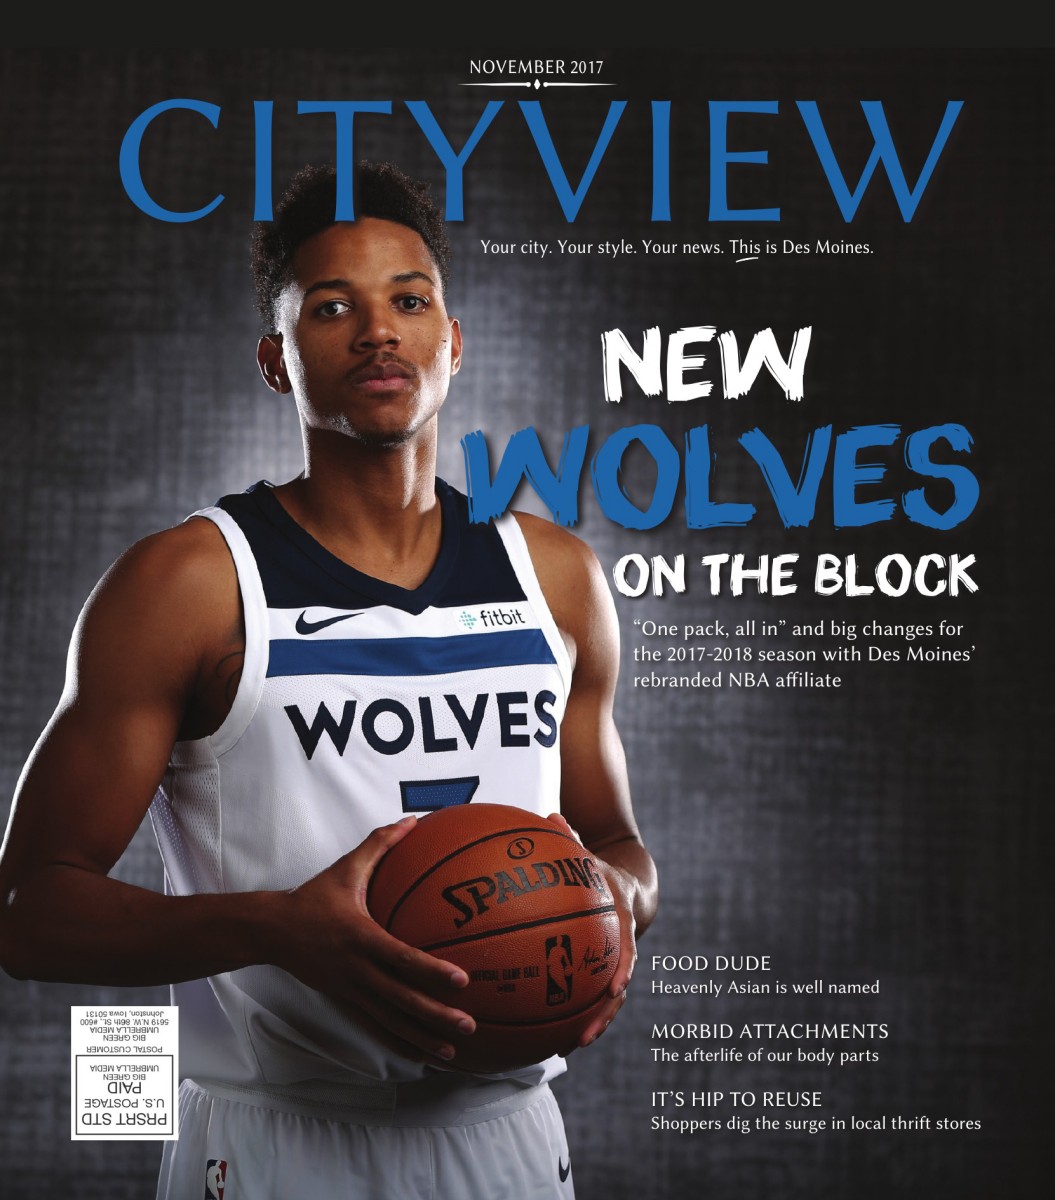 http://www.dmcityview.com/CityviewNovember2017/files/pages/tablet/1.jpg